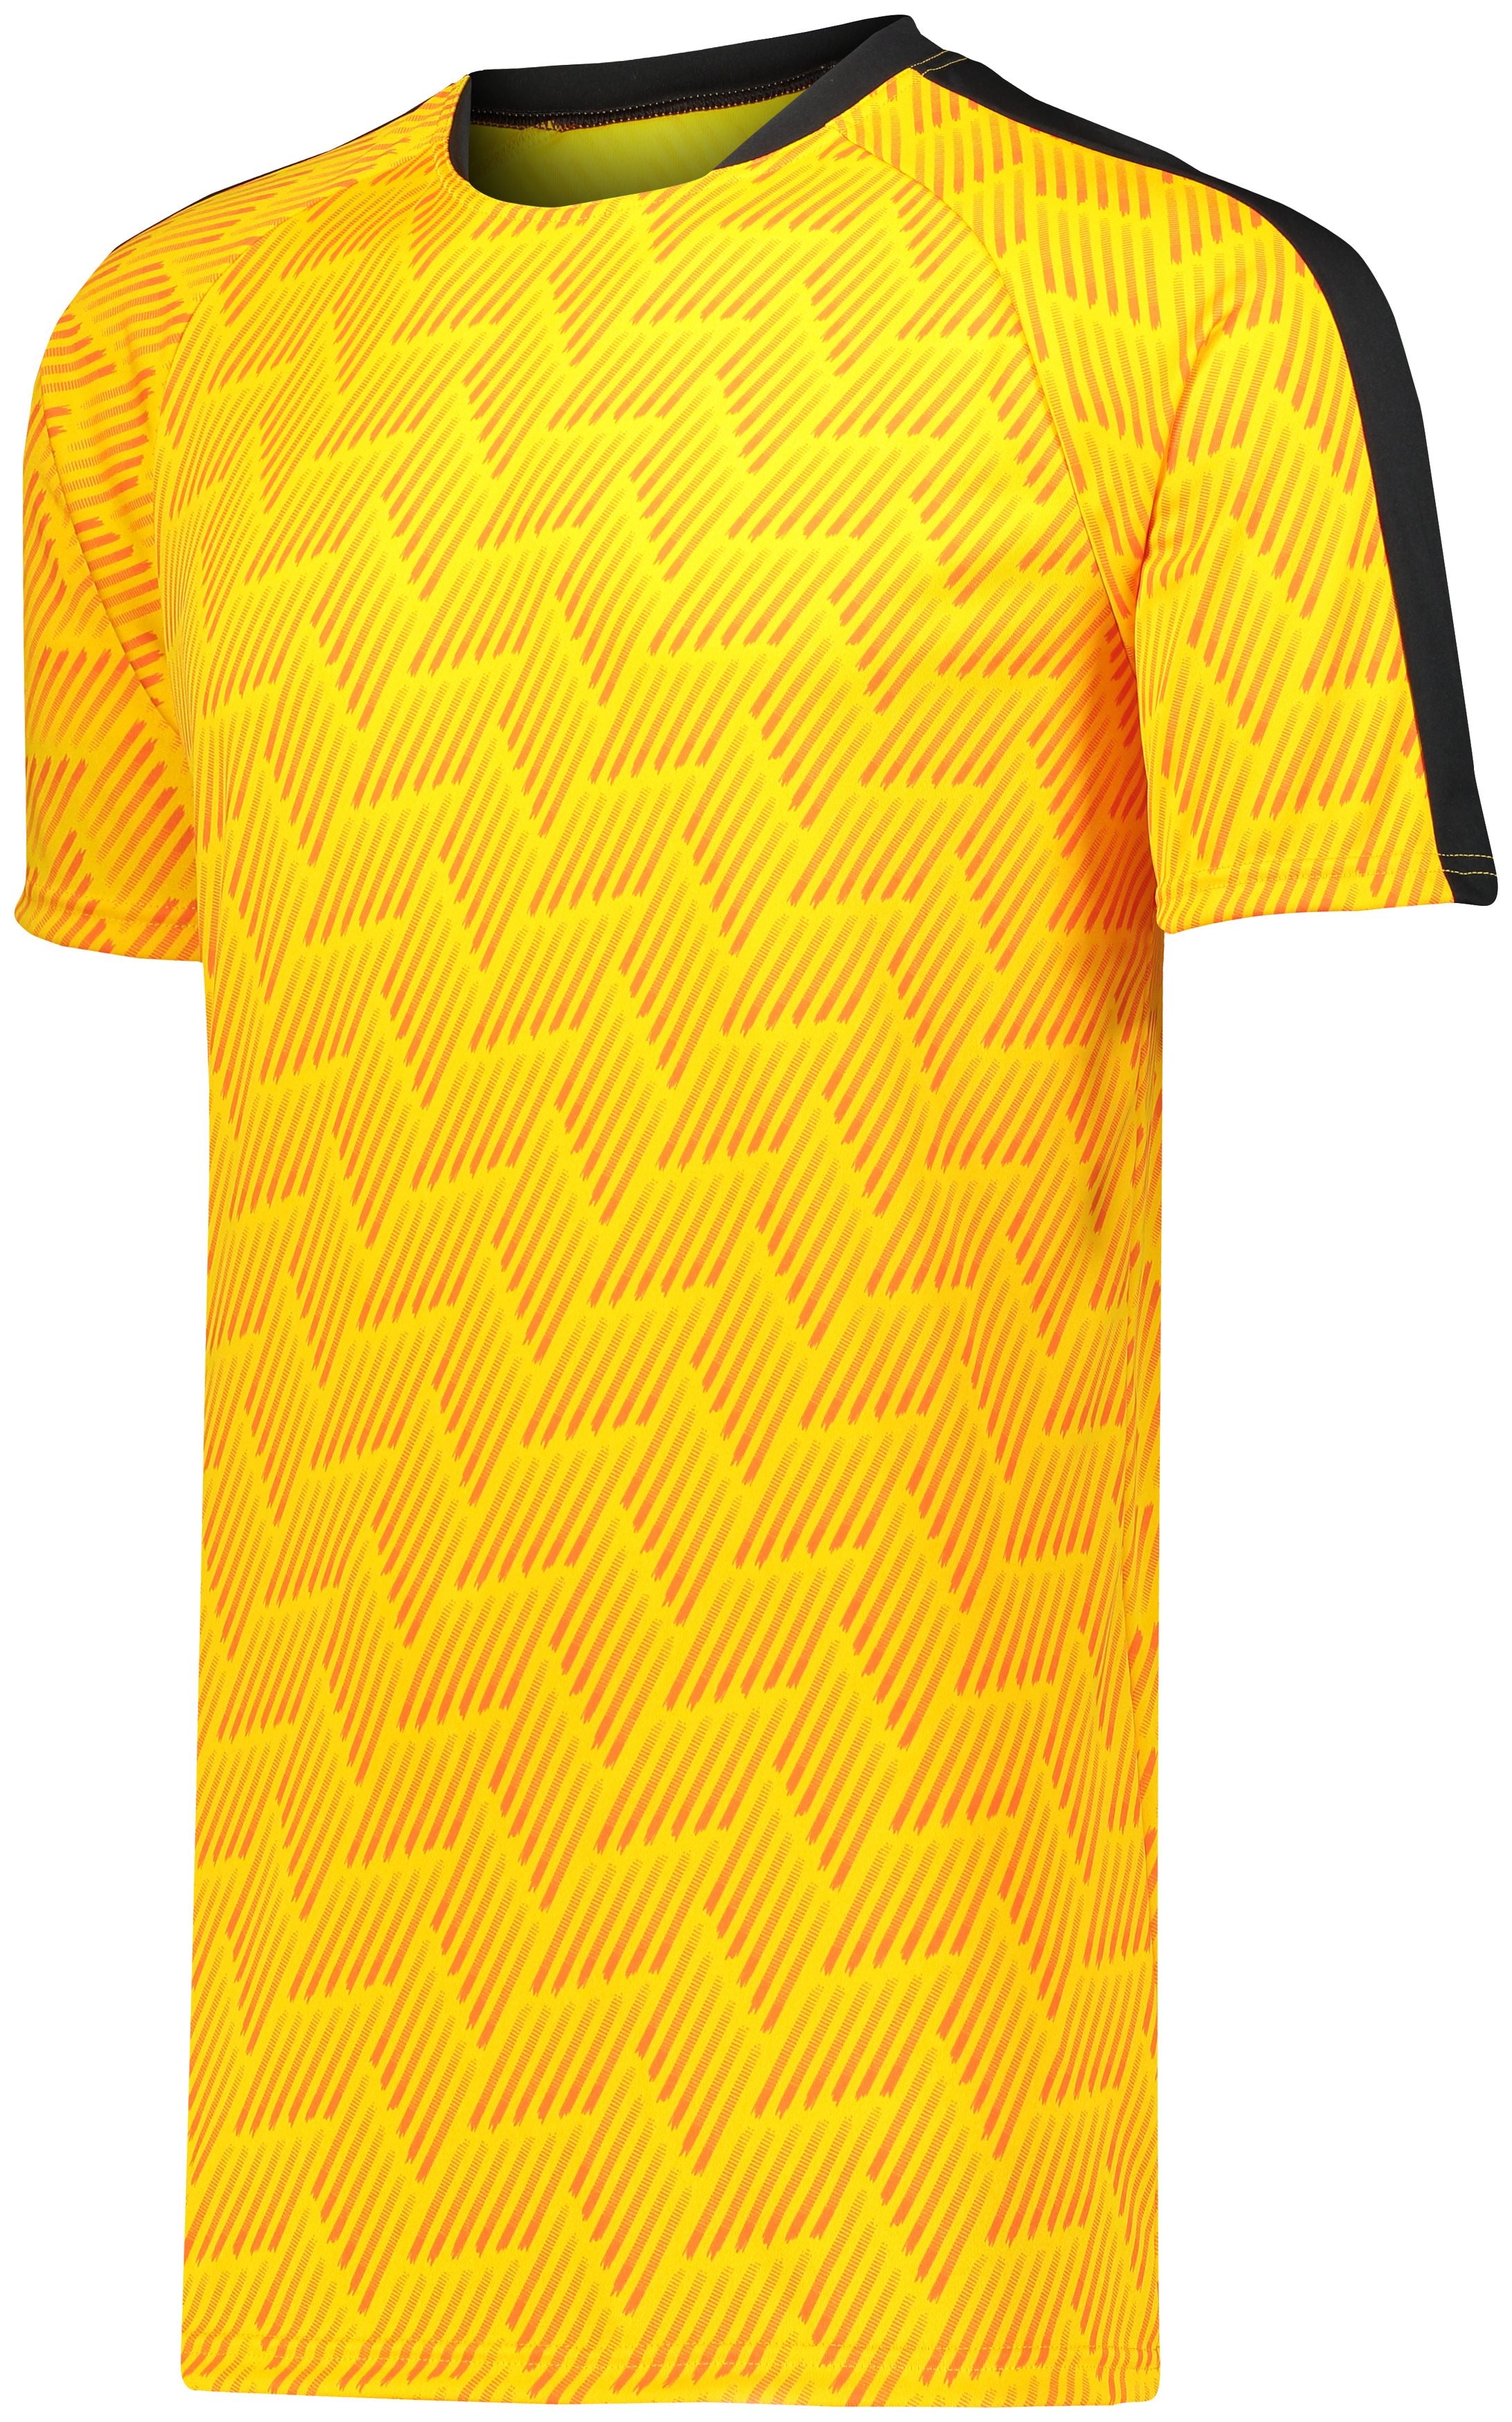 High 5 Youth Hypervolt Jersey in Power Yellow Print/Black  -Part of the Youth, Youth-Jersey, High5-Products, Soccer, Shirts, All-Sports-1 product lines at KanaleyCreations.com